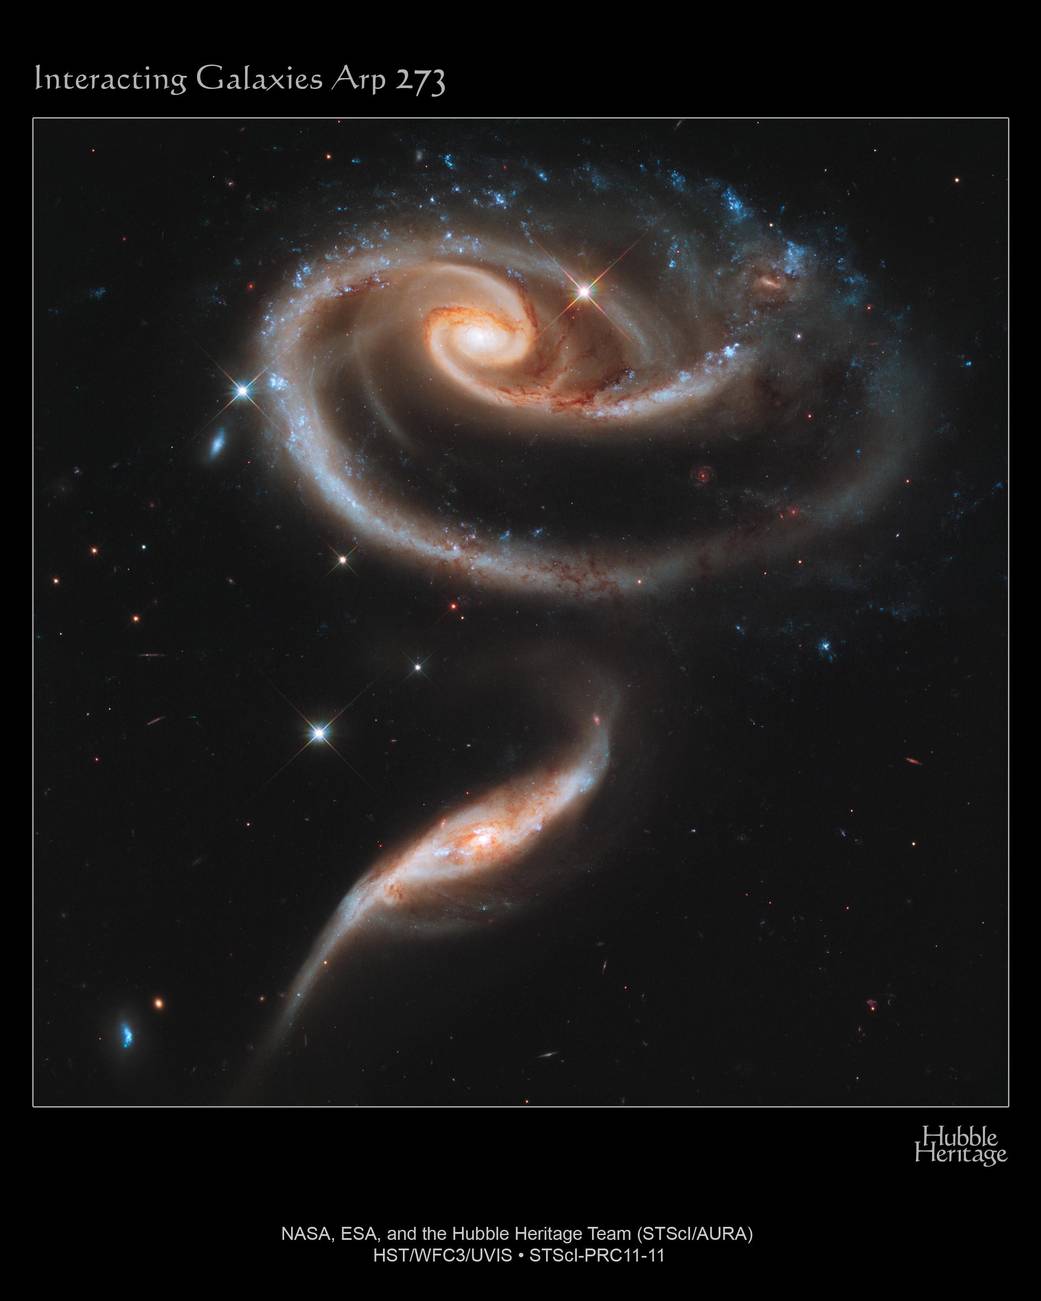 A 'Rose' Made of Galaxies